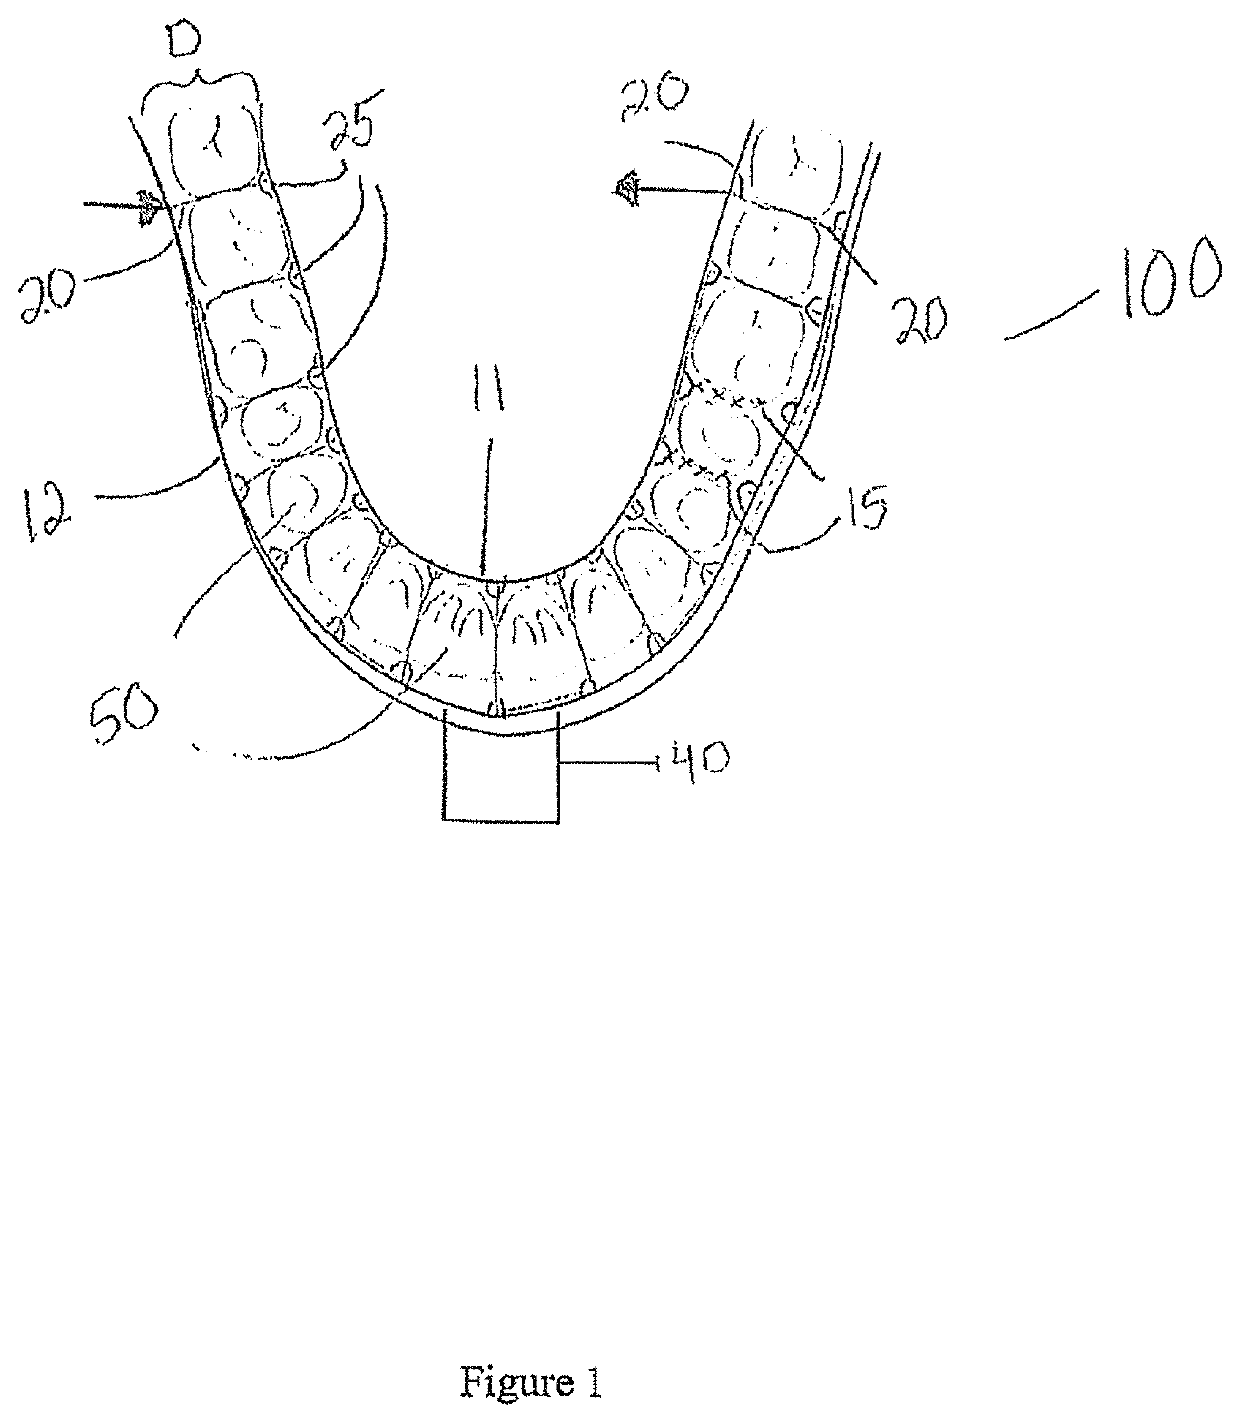 Interdental cleansing device